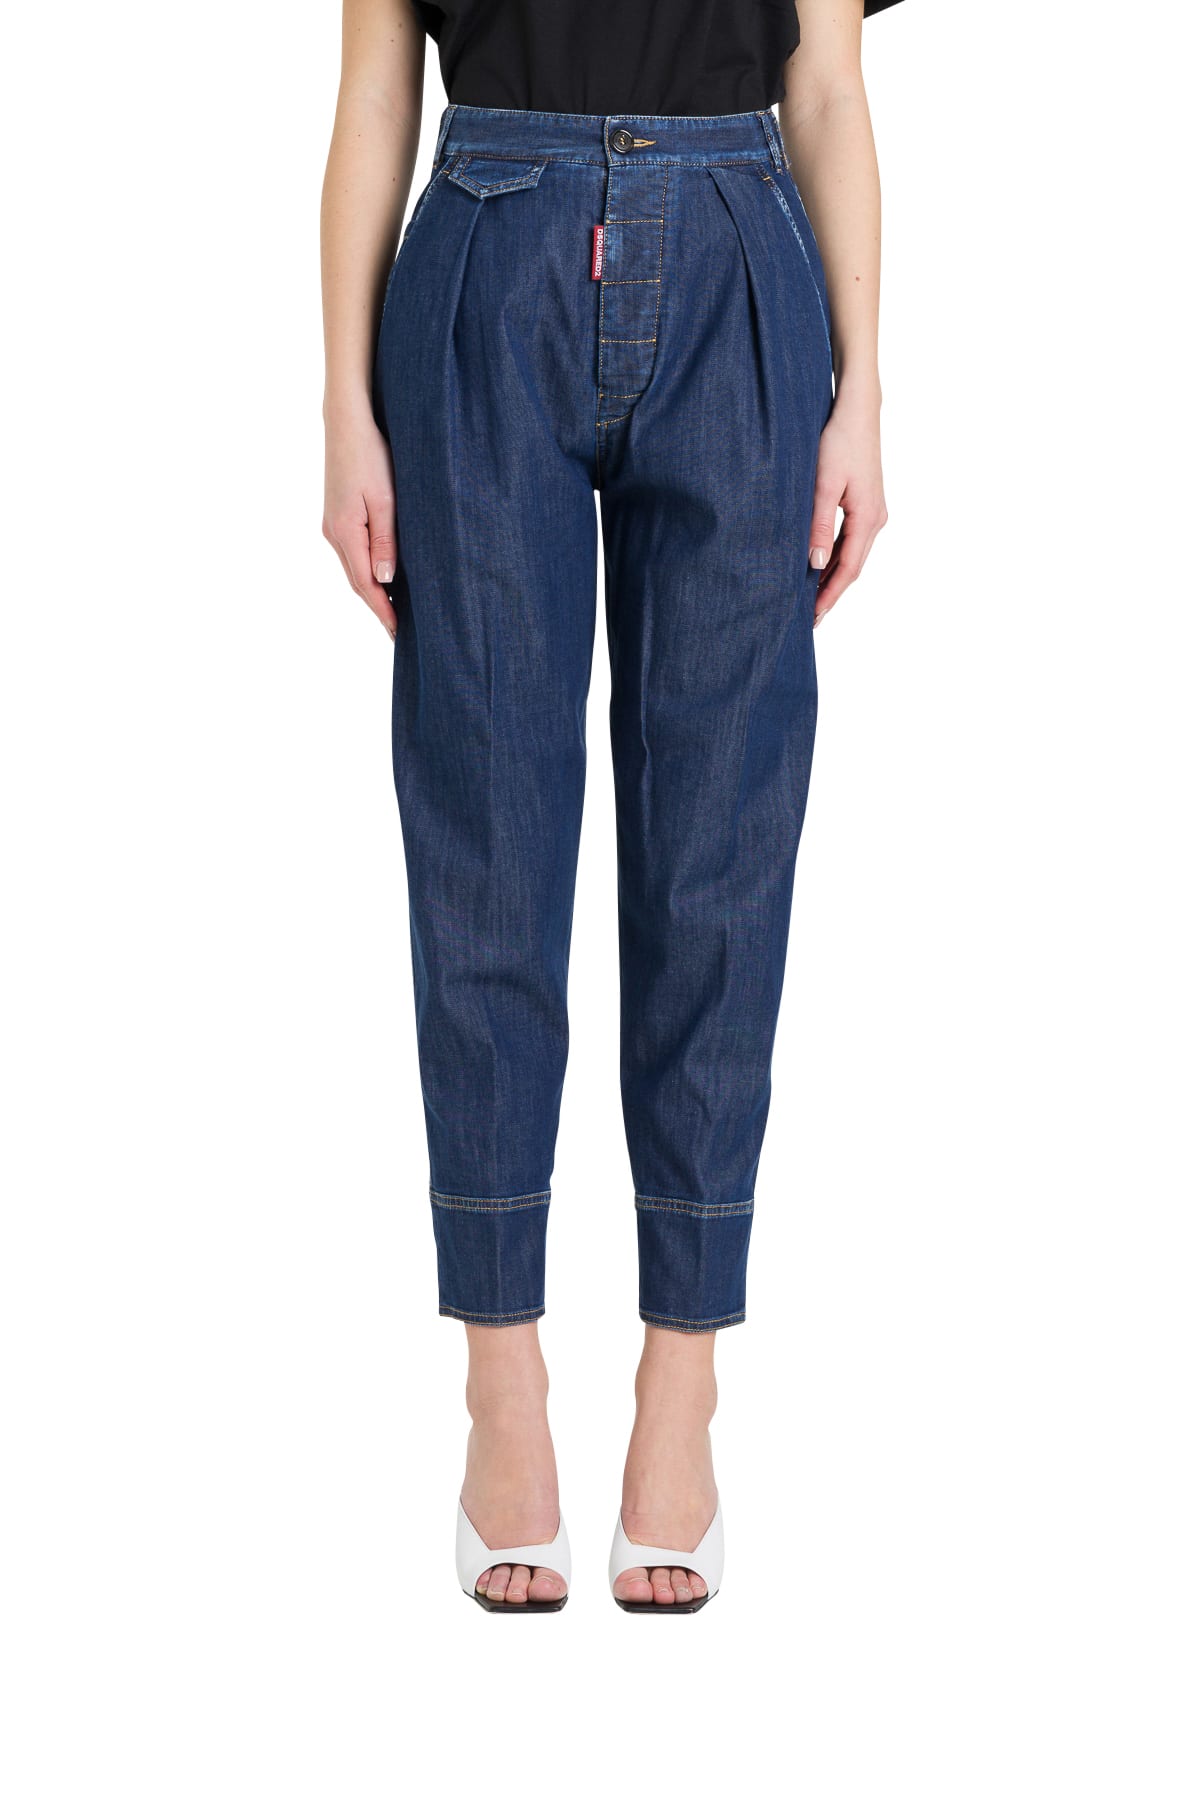 DSQUARED2 HIGH-RISE CARROT JEANS,11274368